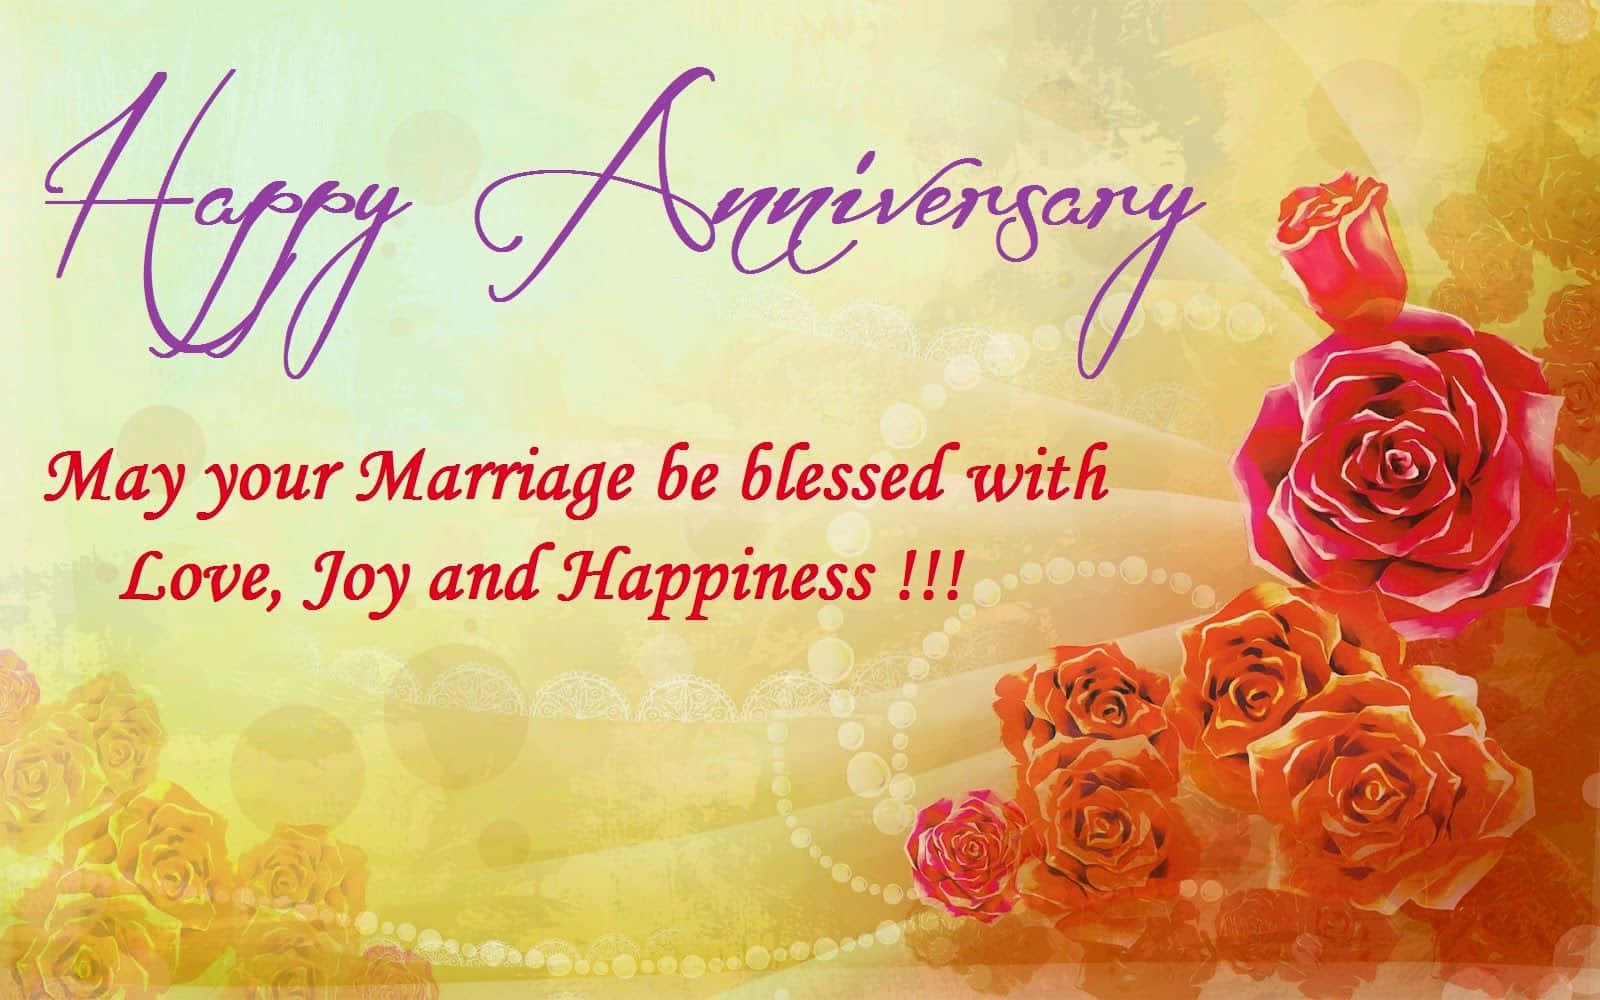 Celebrating Love and Lasting Commitment